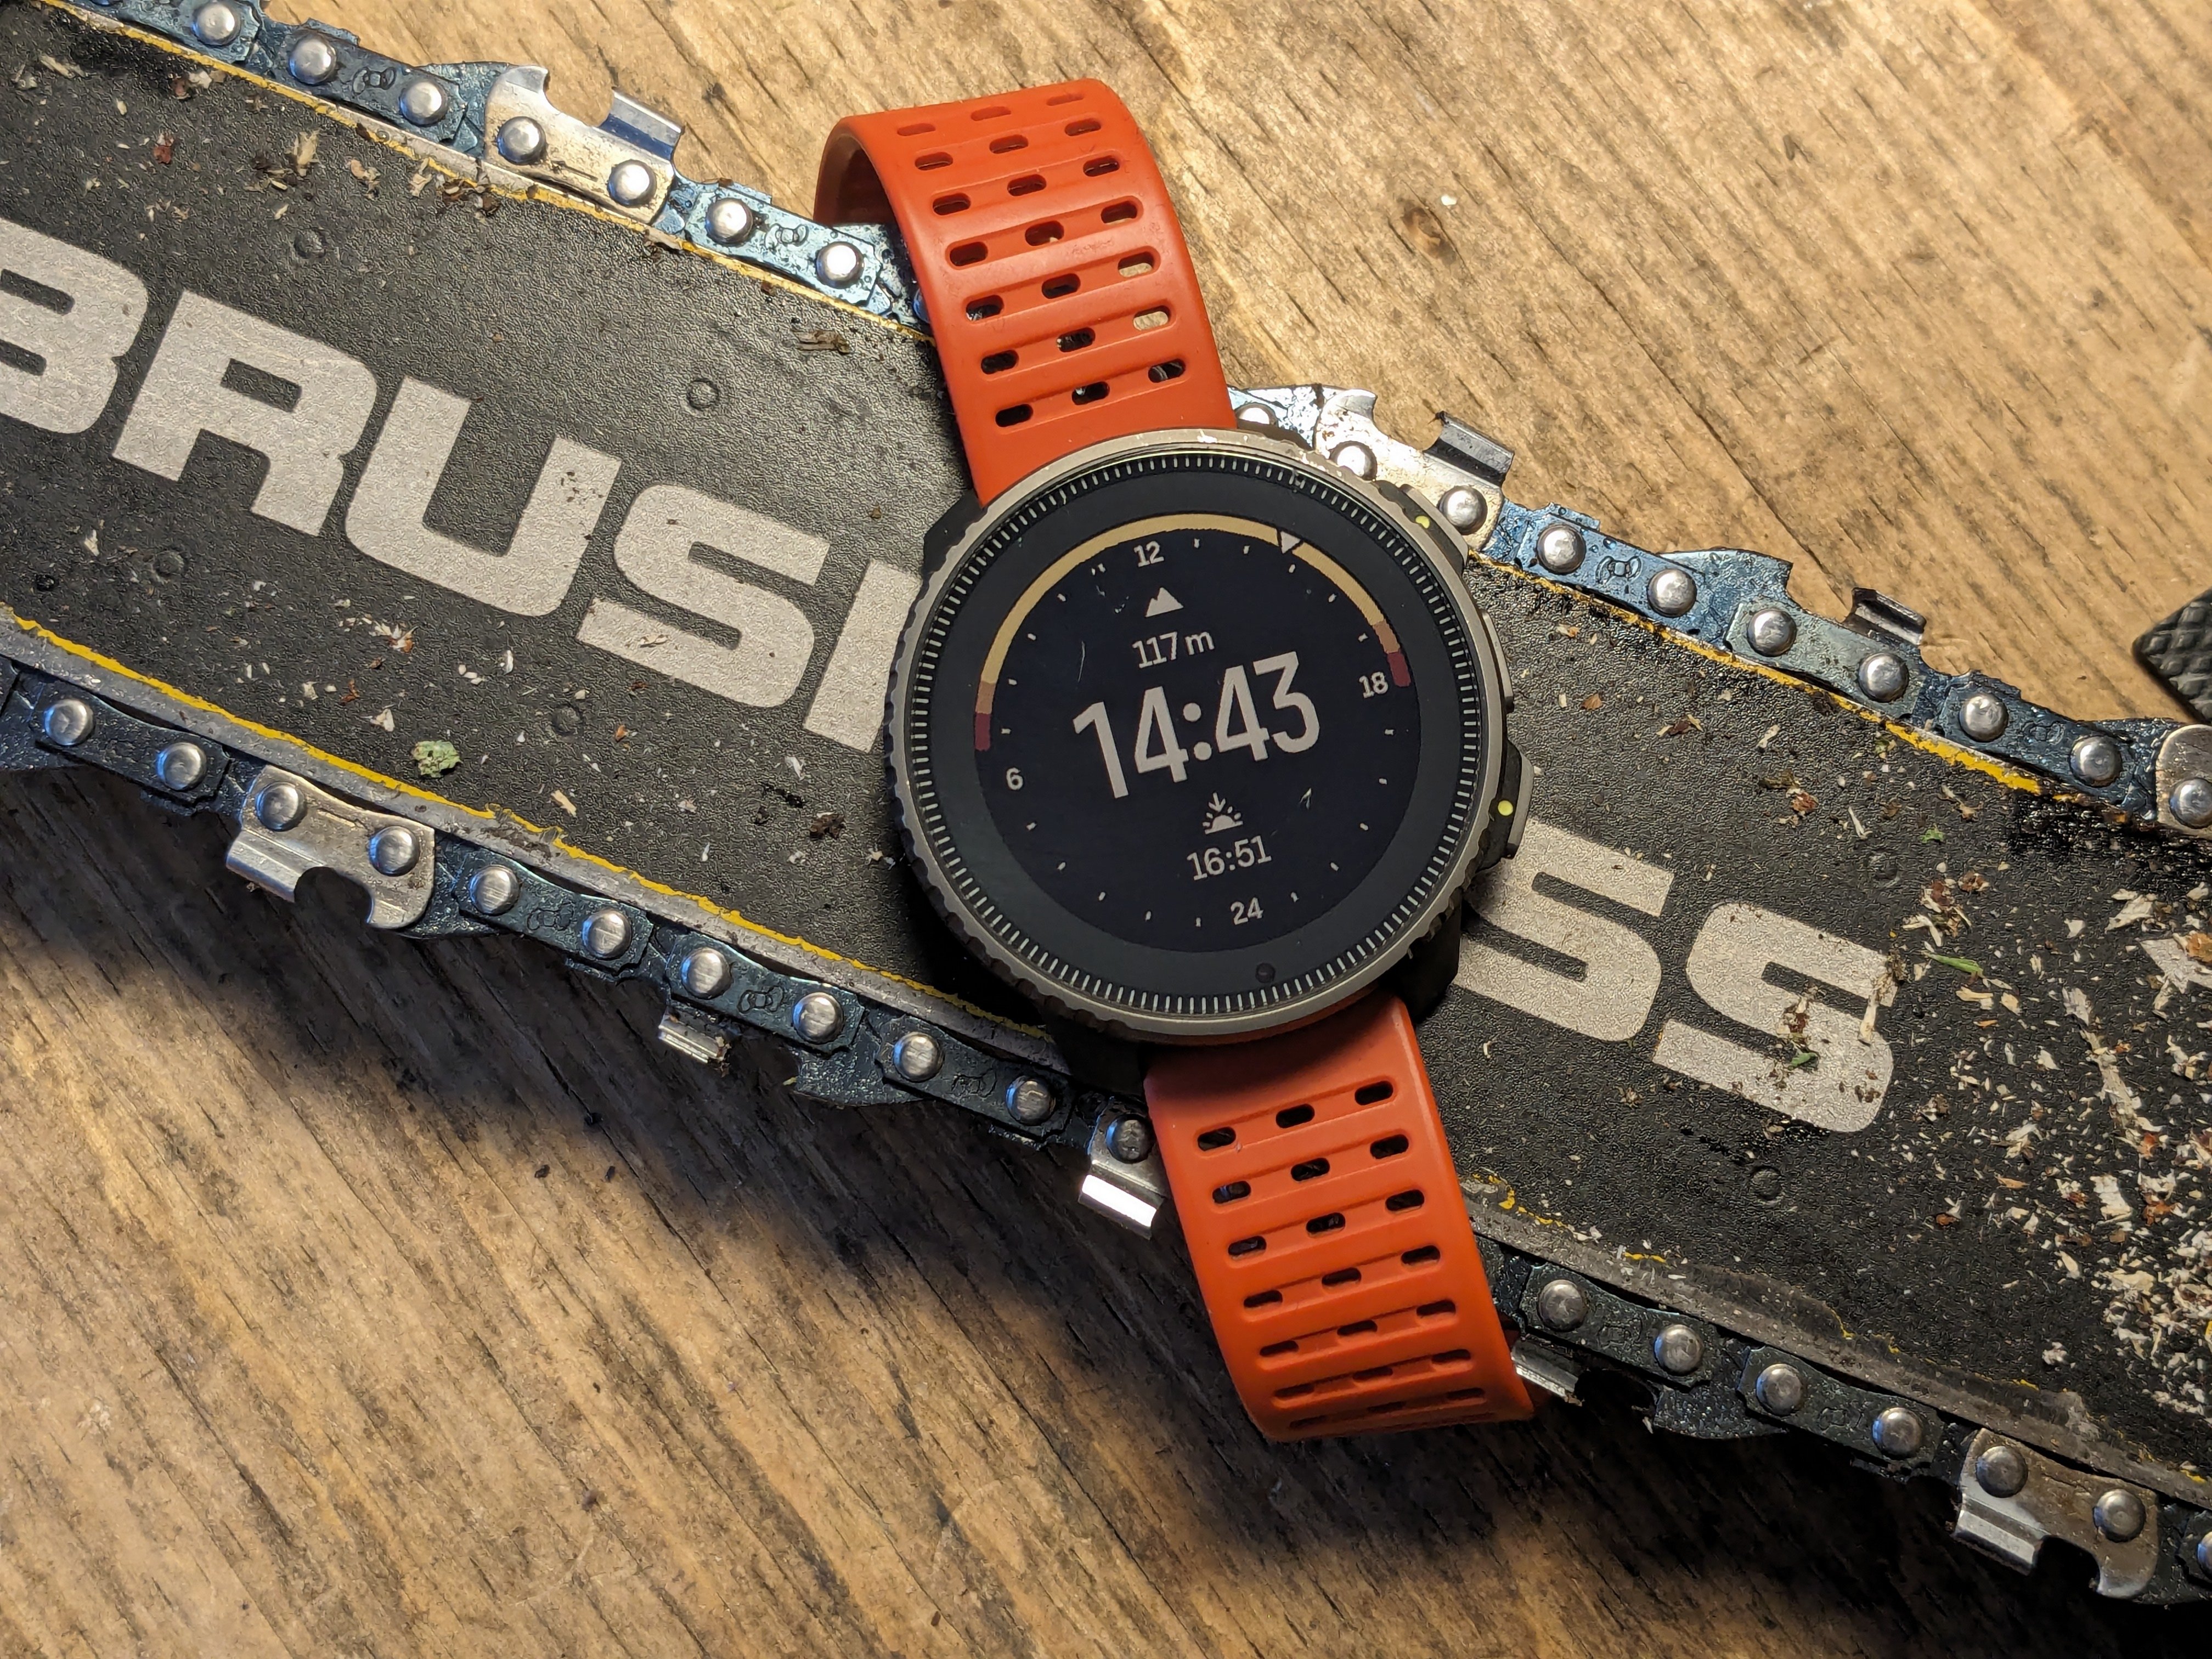 Suunto Vertical goes big with solar charging & better tracking